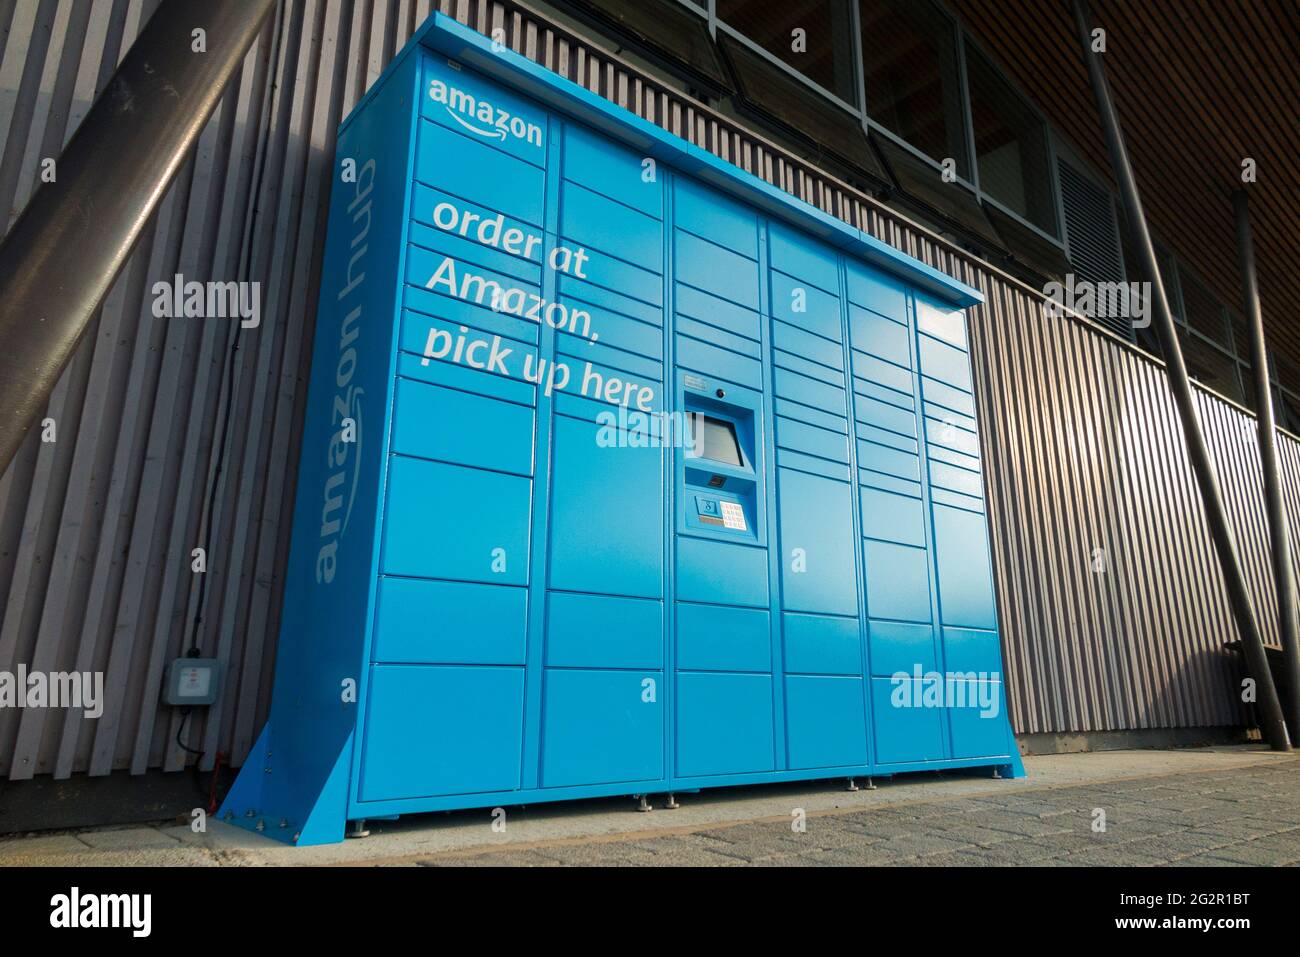 Amazon hub, a pick up point with self service lockers for collecting / collection of items, & presumably return / returns of unwanted item or goods & purchases. UK (123) Stock Photo